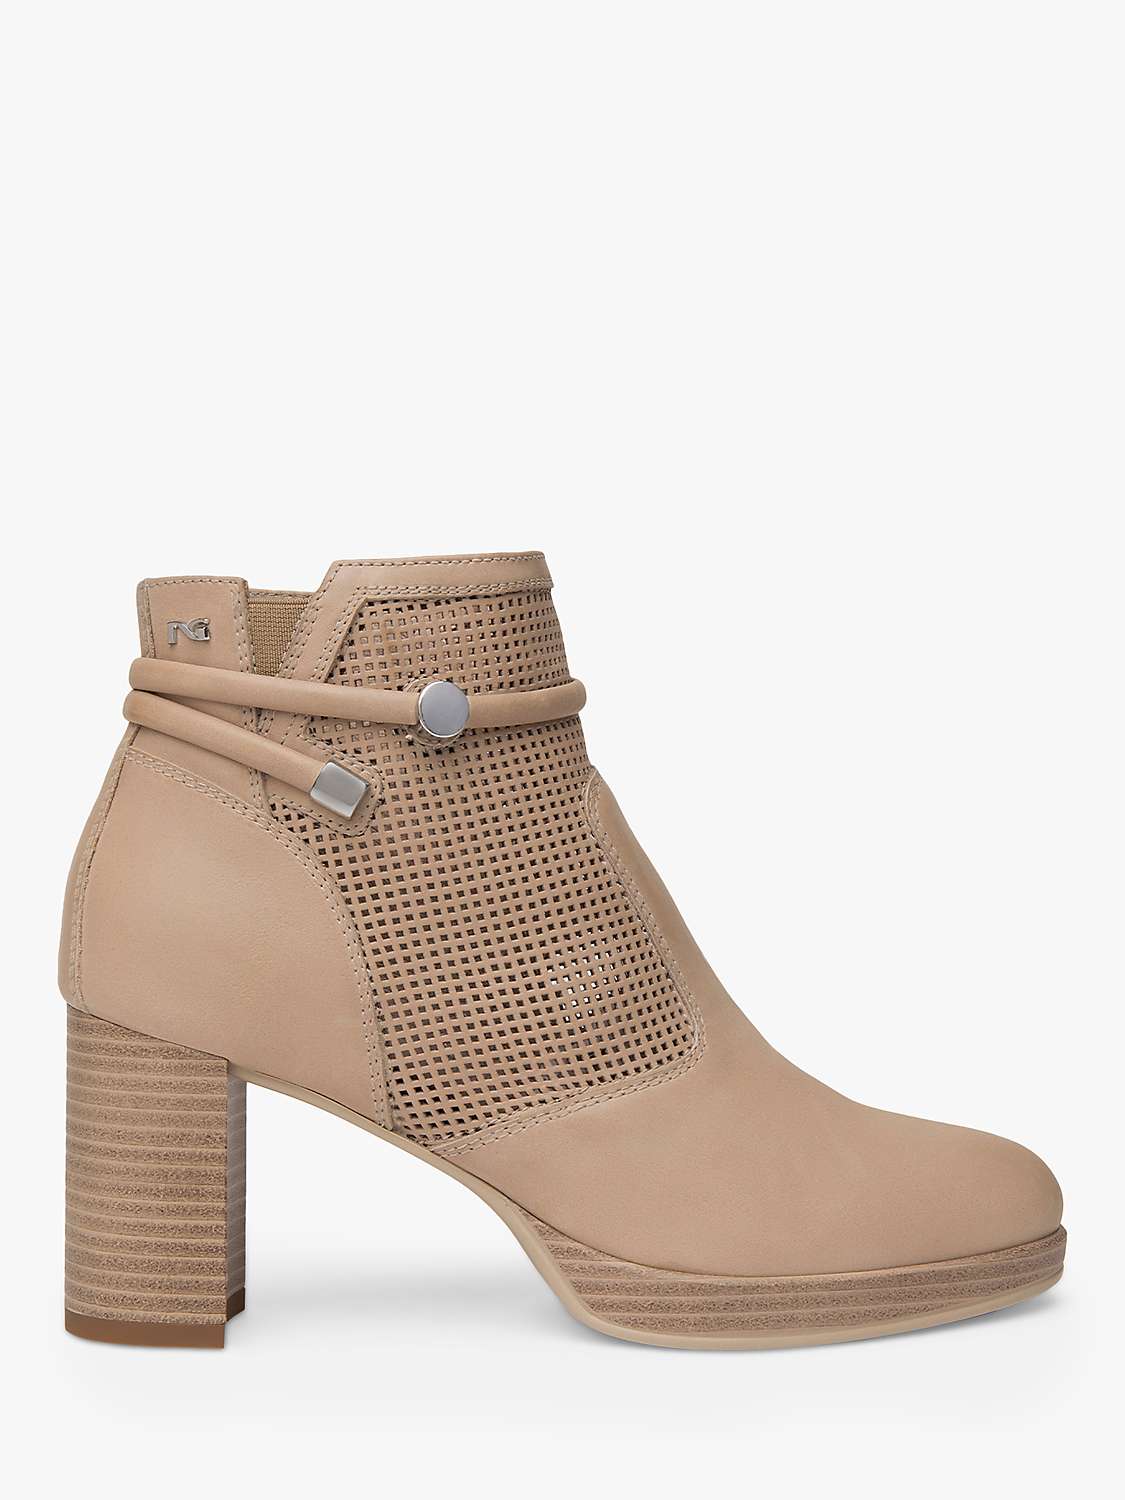 Buy NeroGiardini Perforated Leather Platform Ankle Boots, Champagne Online at johnlewis.com